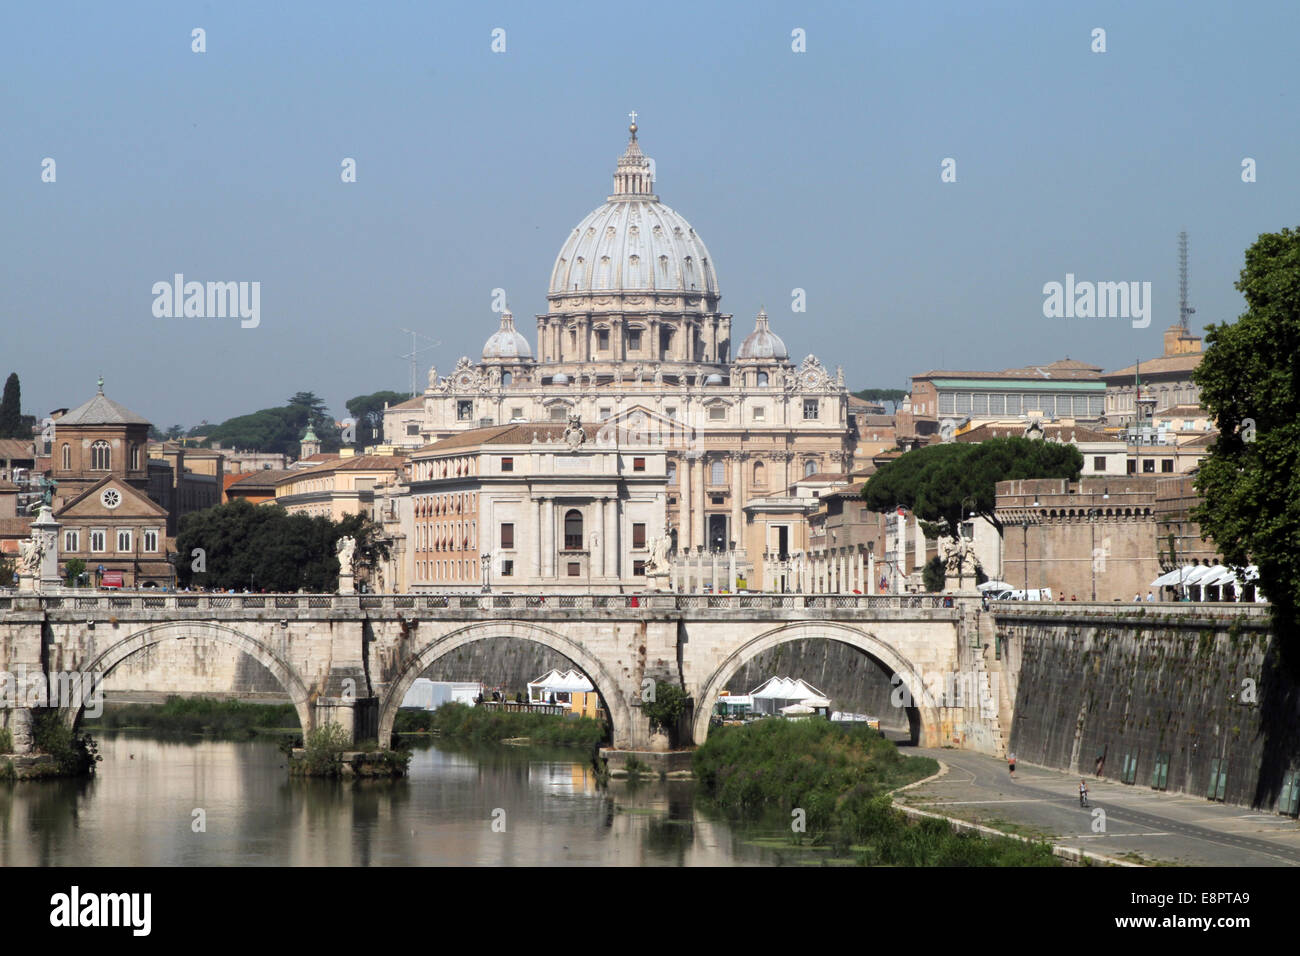 View towards St Peter's Basilica and the Vatican from the River Tiber, Rome, Italy Stock Photo